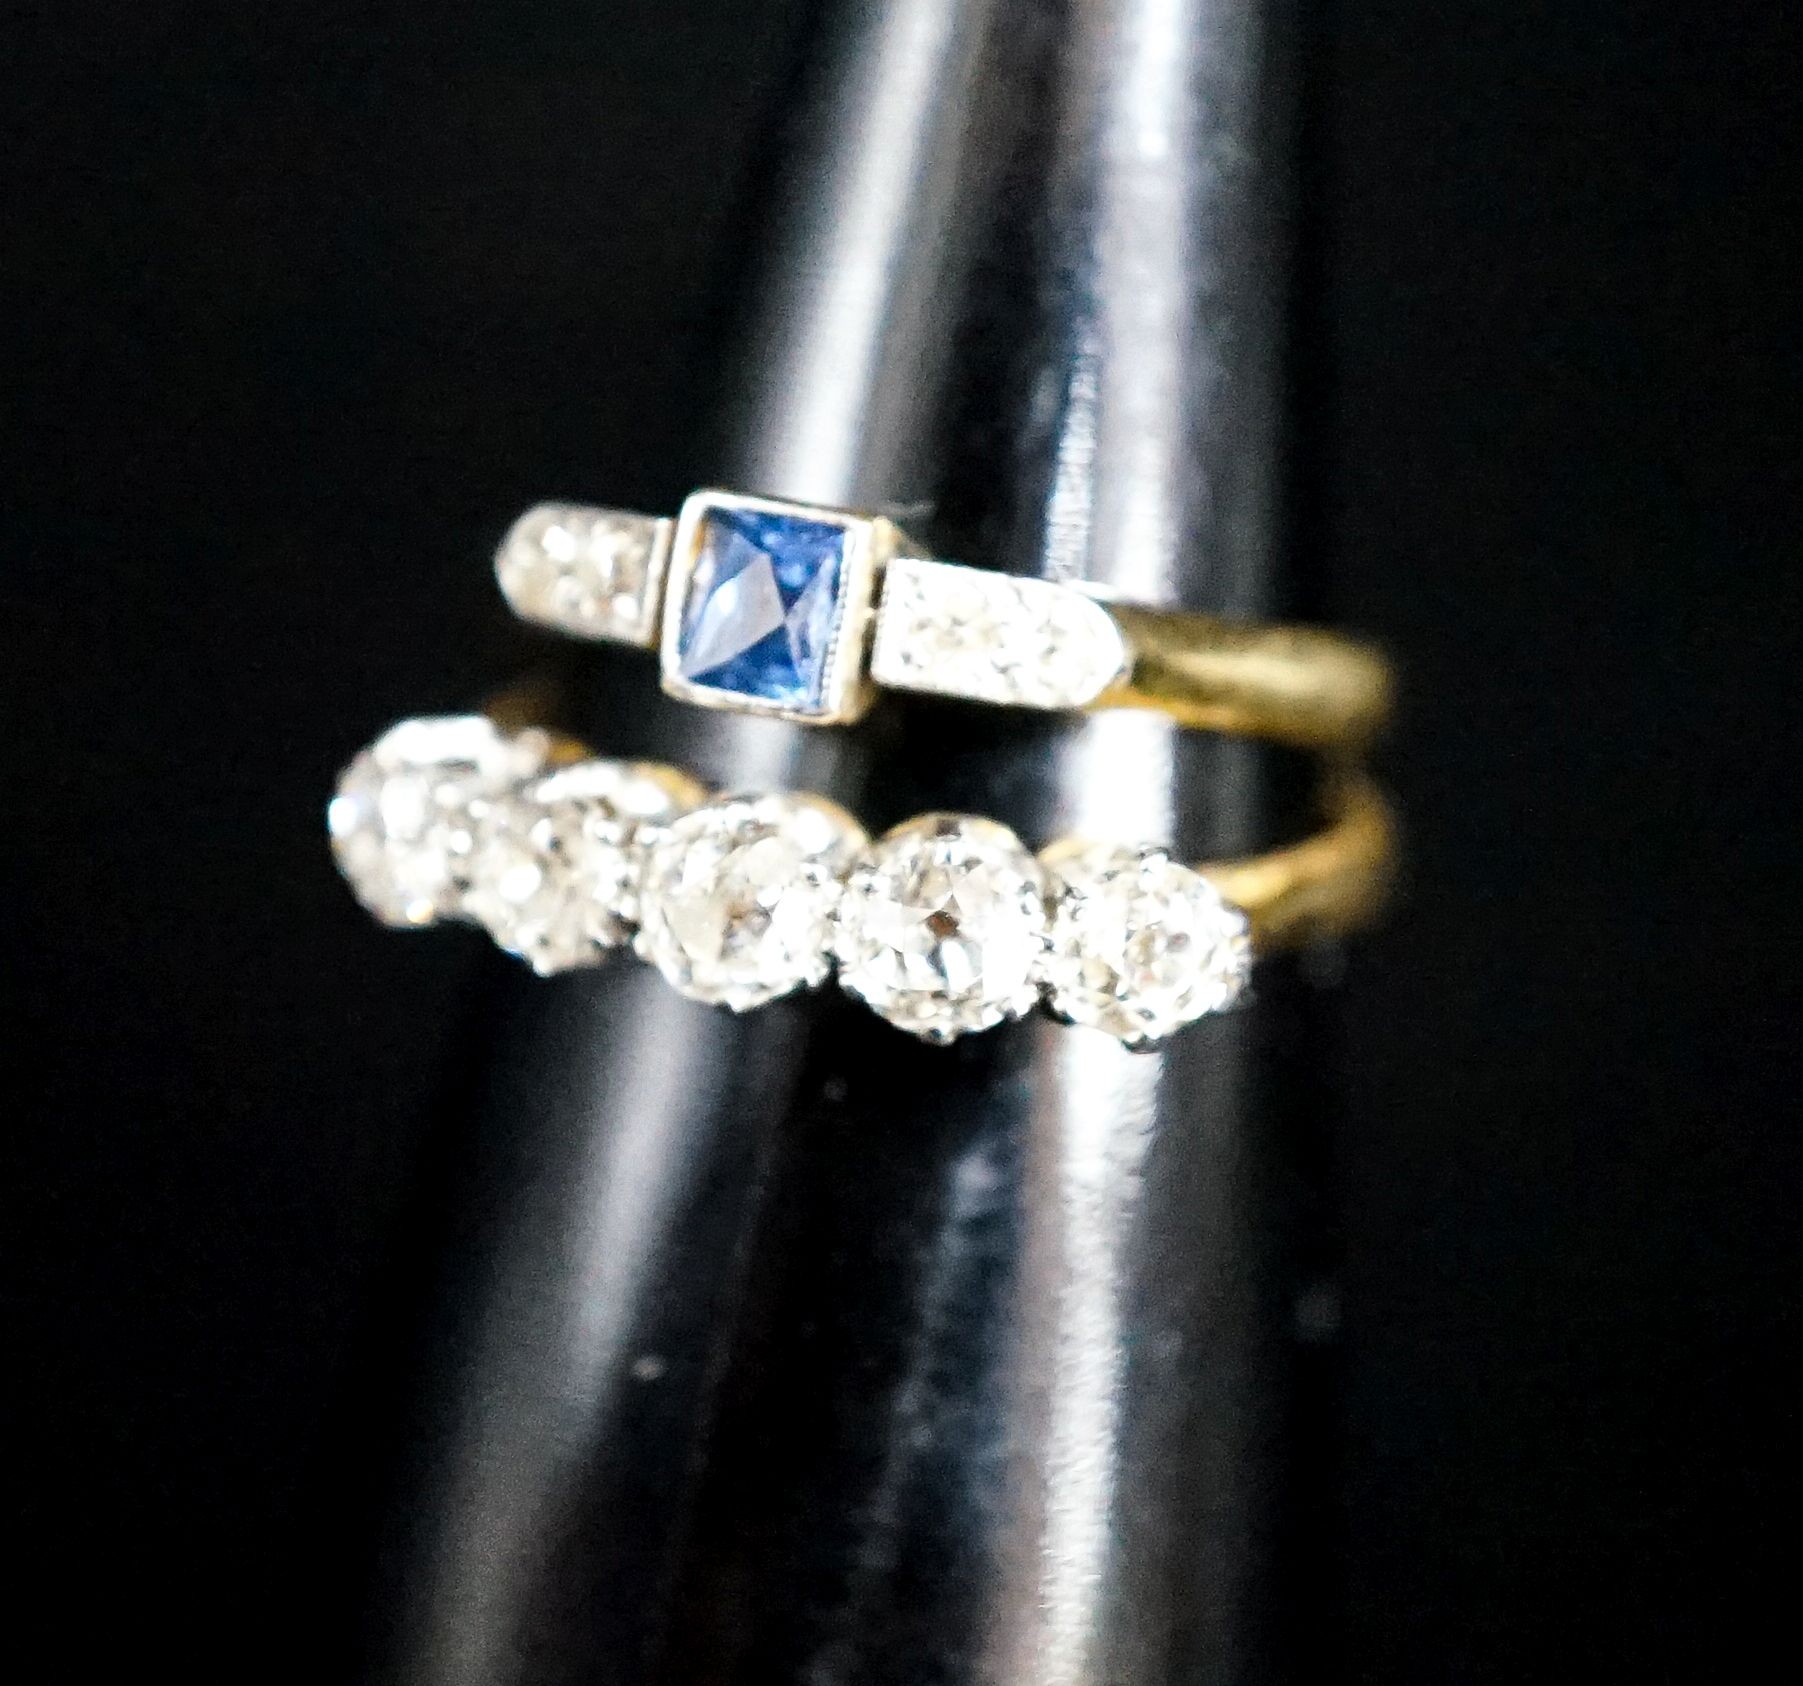 An 18ct and five stone diamond ring and a similar sapphire and diamond ring (now soldered together), gross 4.2 grams.